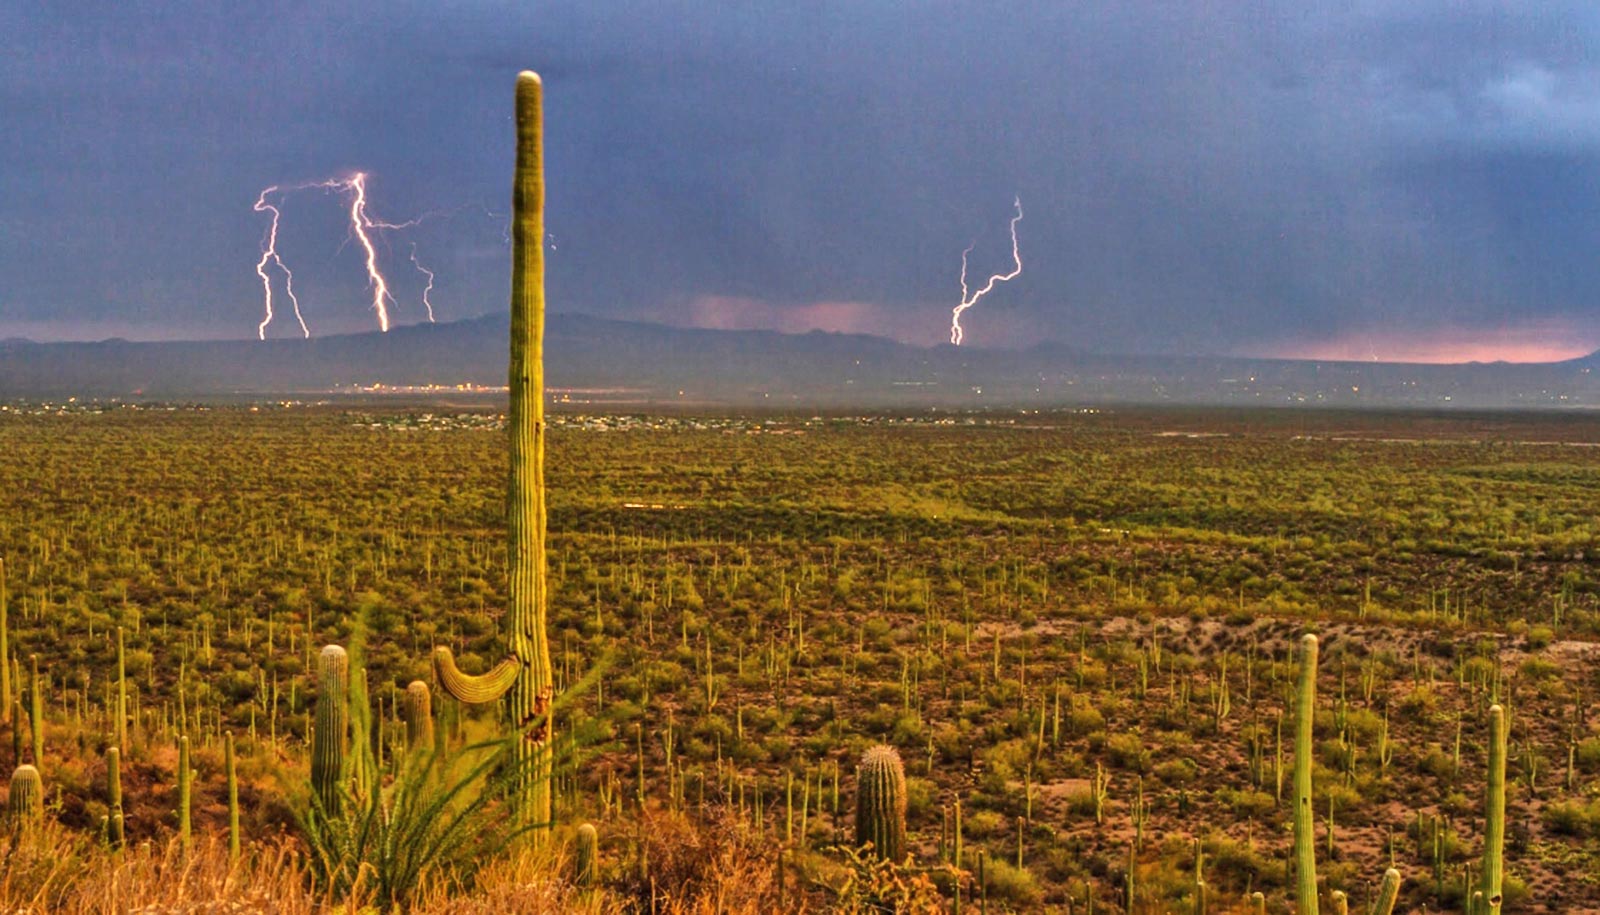 Smell of desert rainstorms may have health benefits